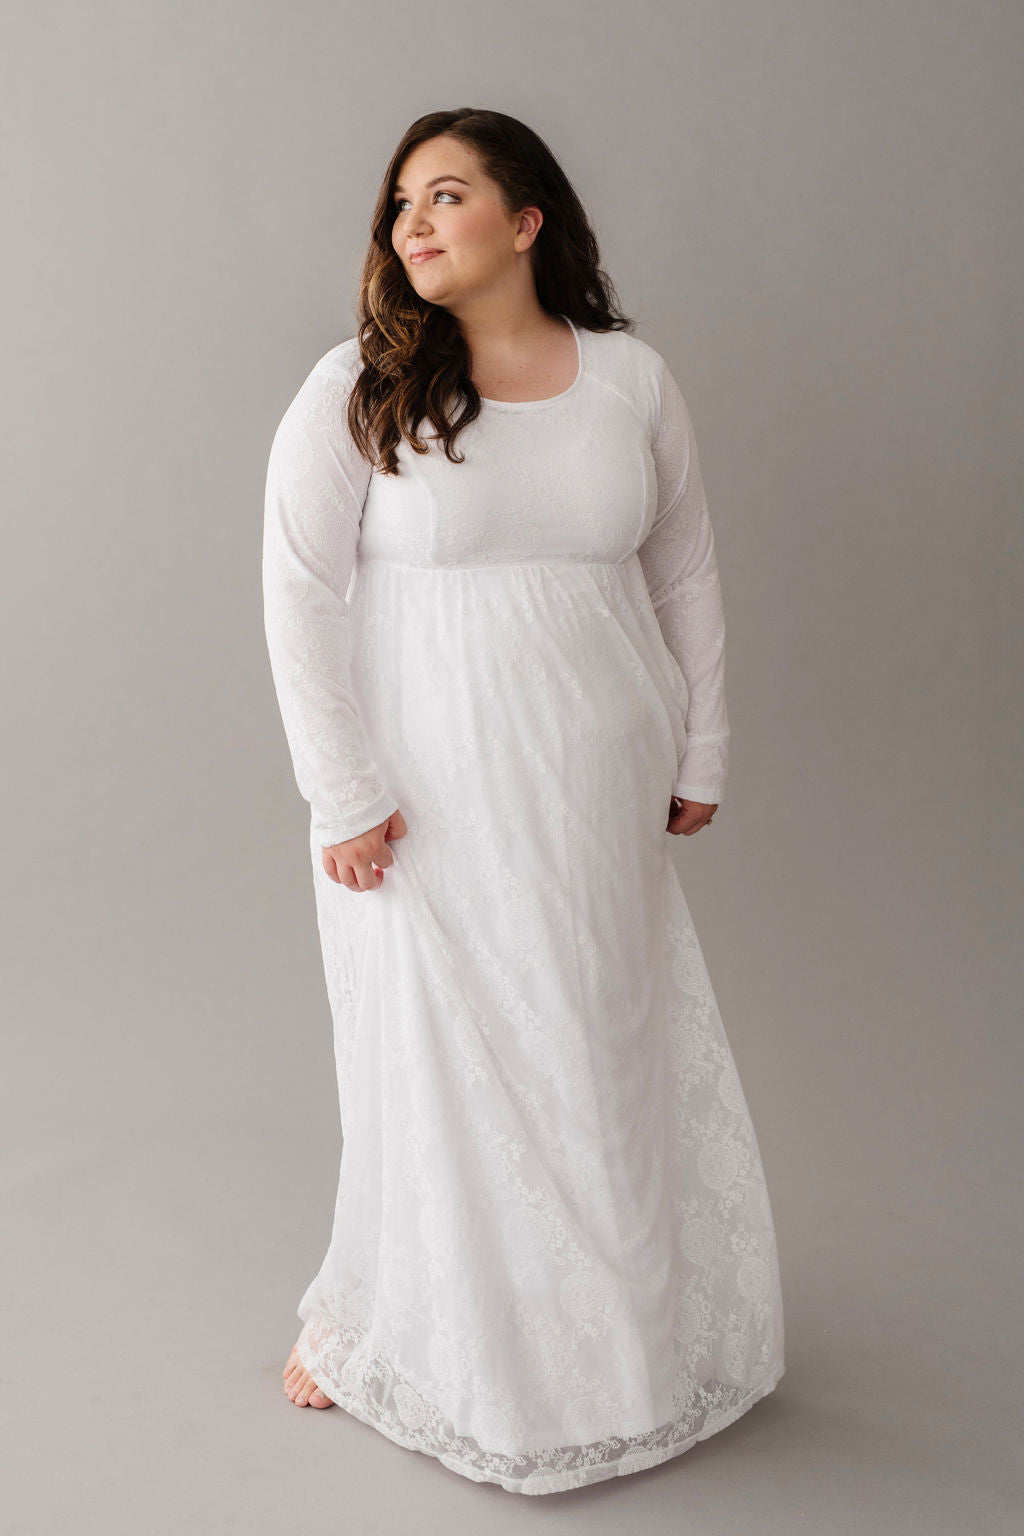 simply white temple dresses